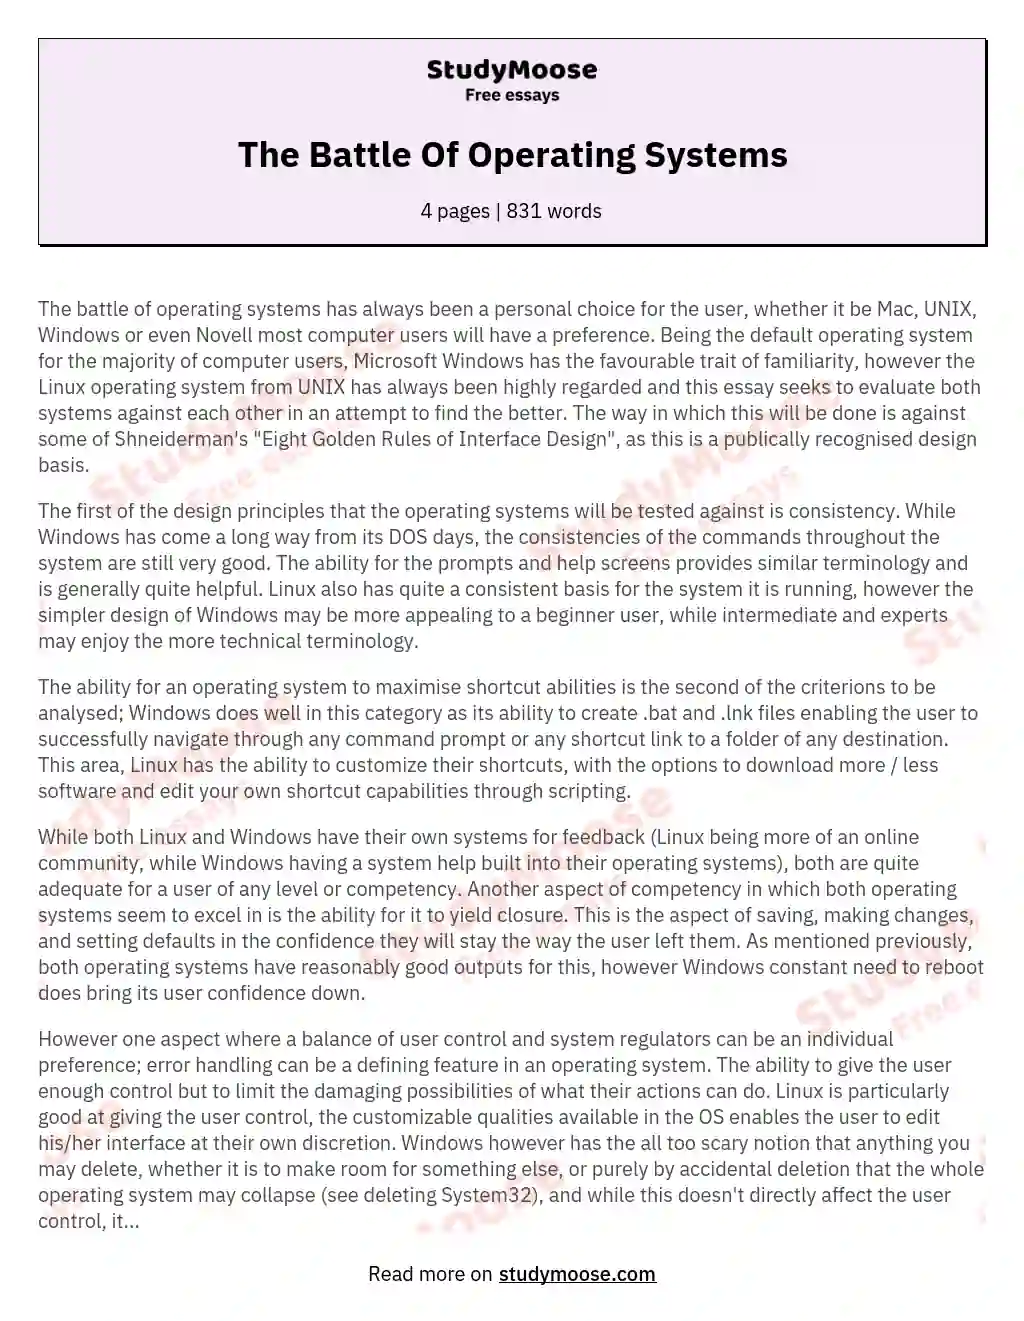 The Battle Of Operating Systems essay